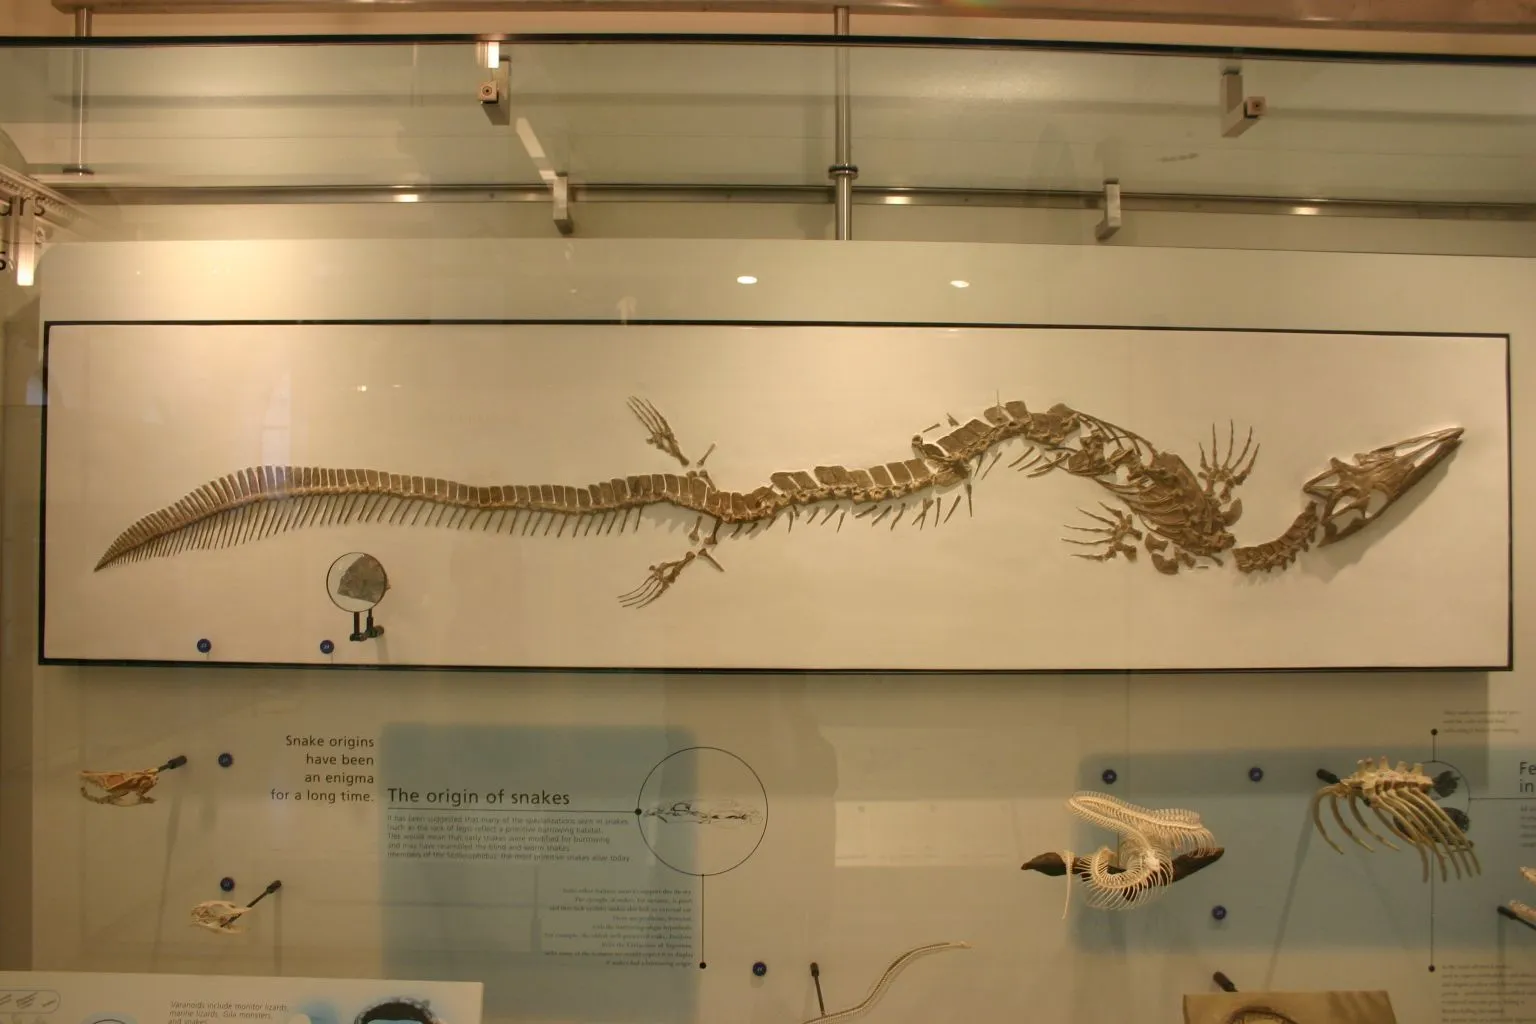 The body structure and tail of this mosasaur were some of its recognizable features.